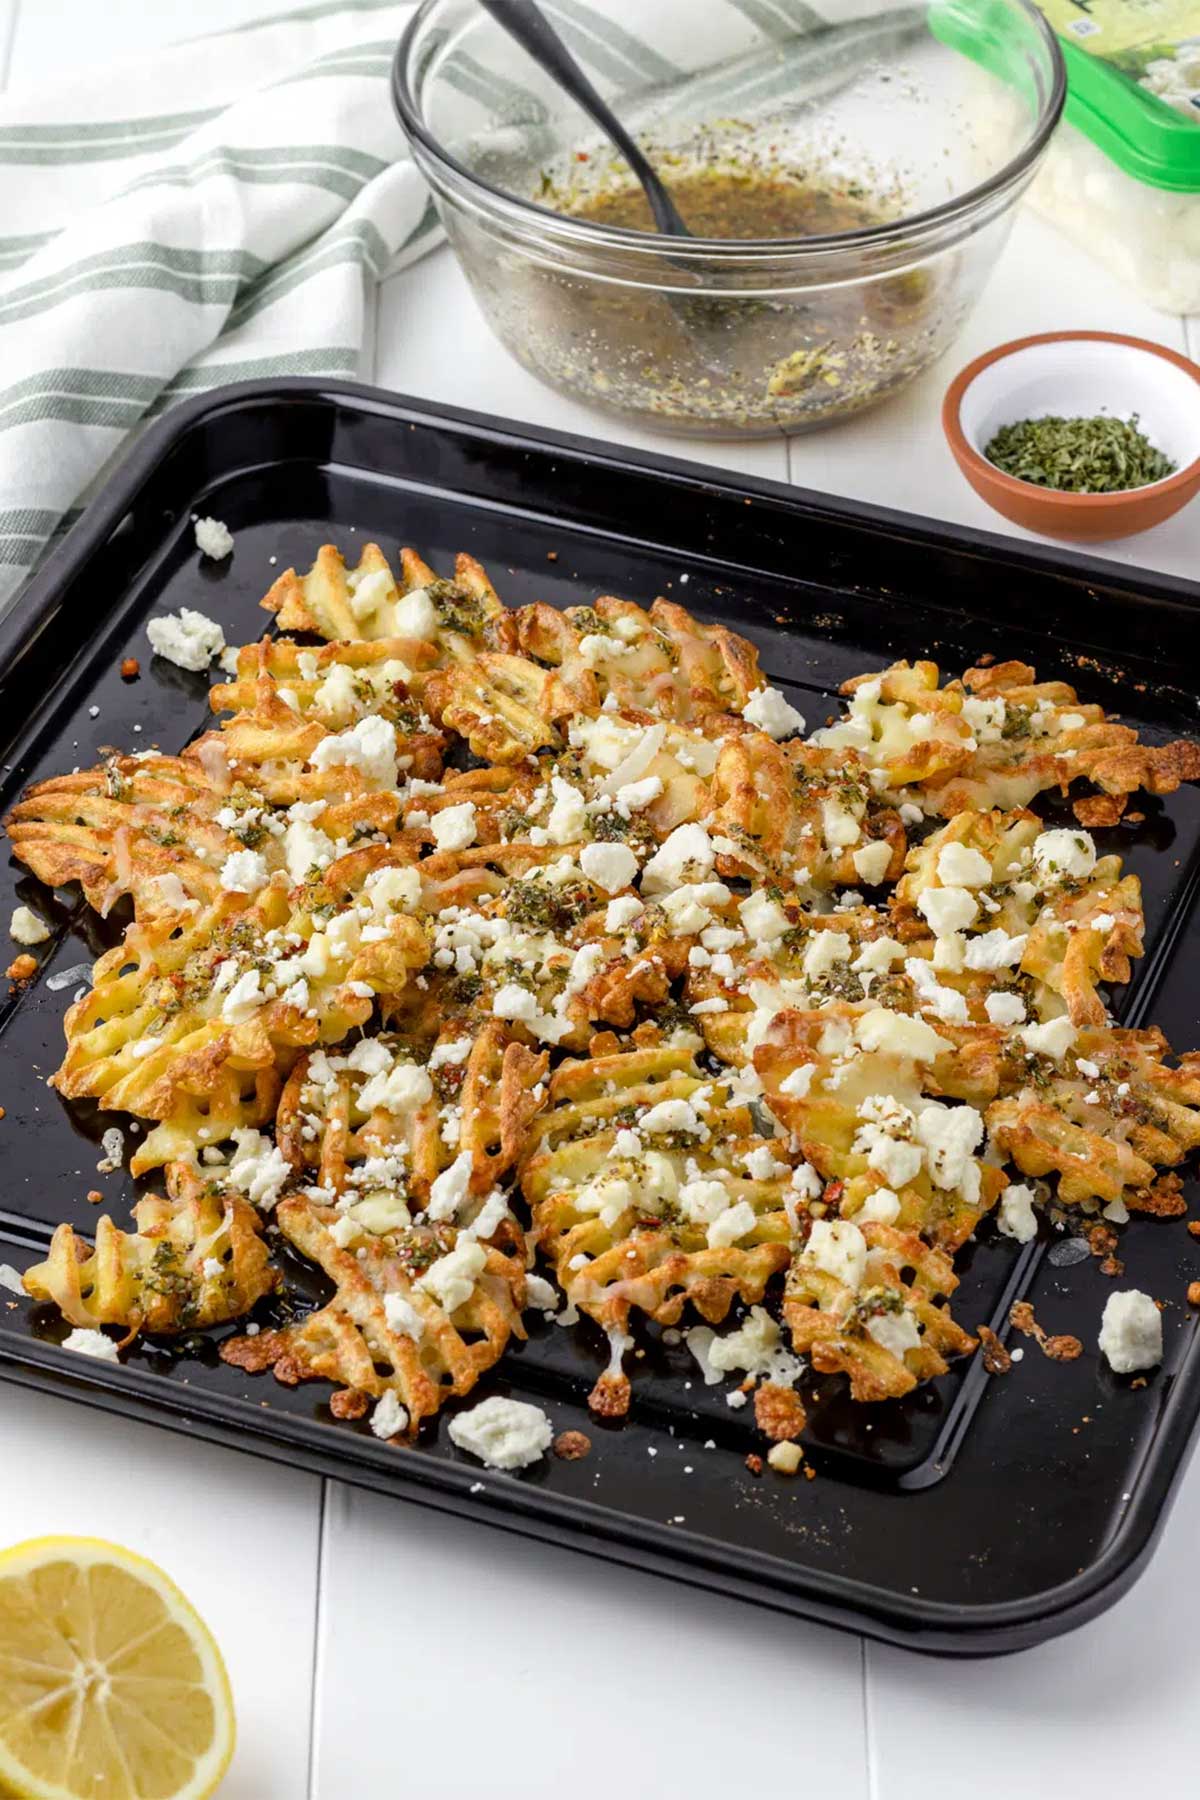 Top and angle view of waffle fries in a black sheet pan topped with feta cheese and pesto